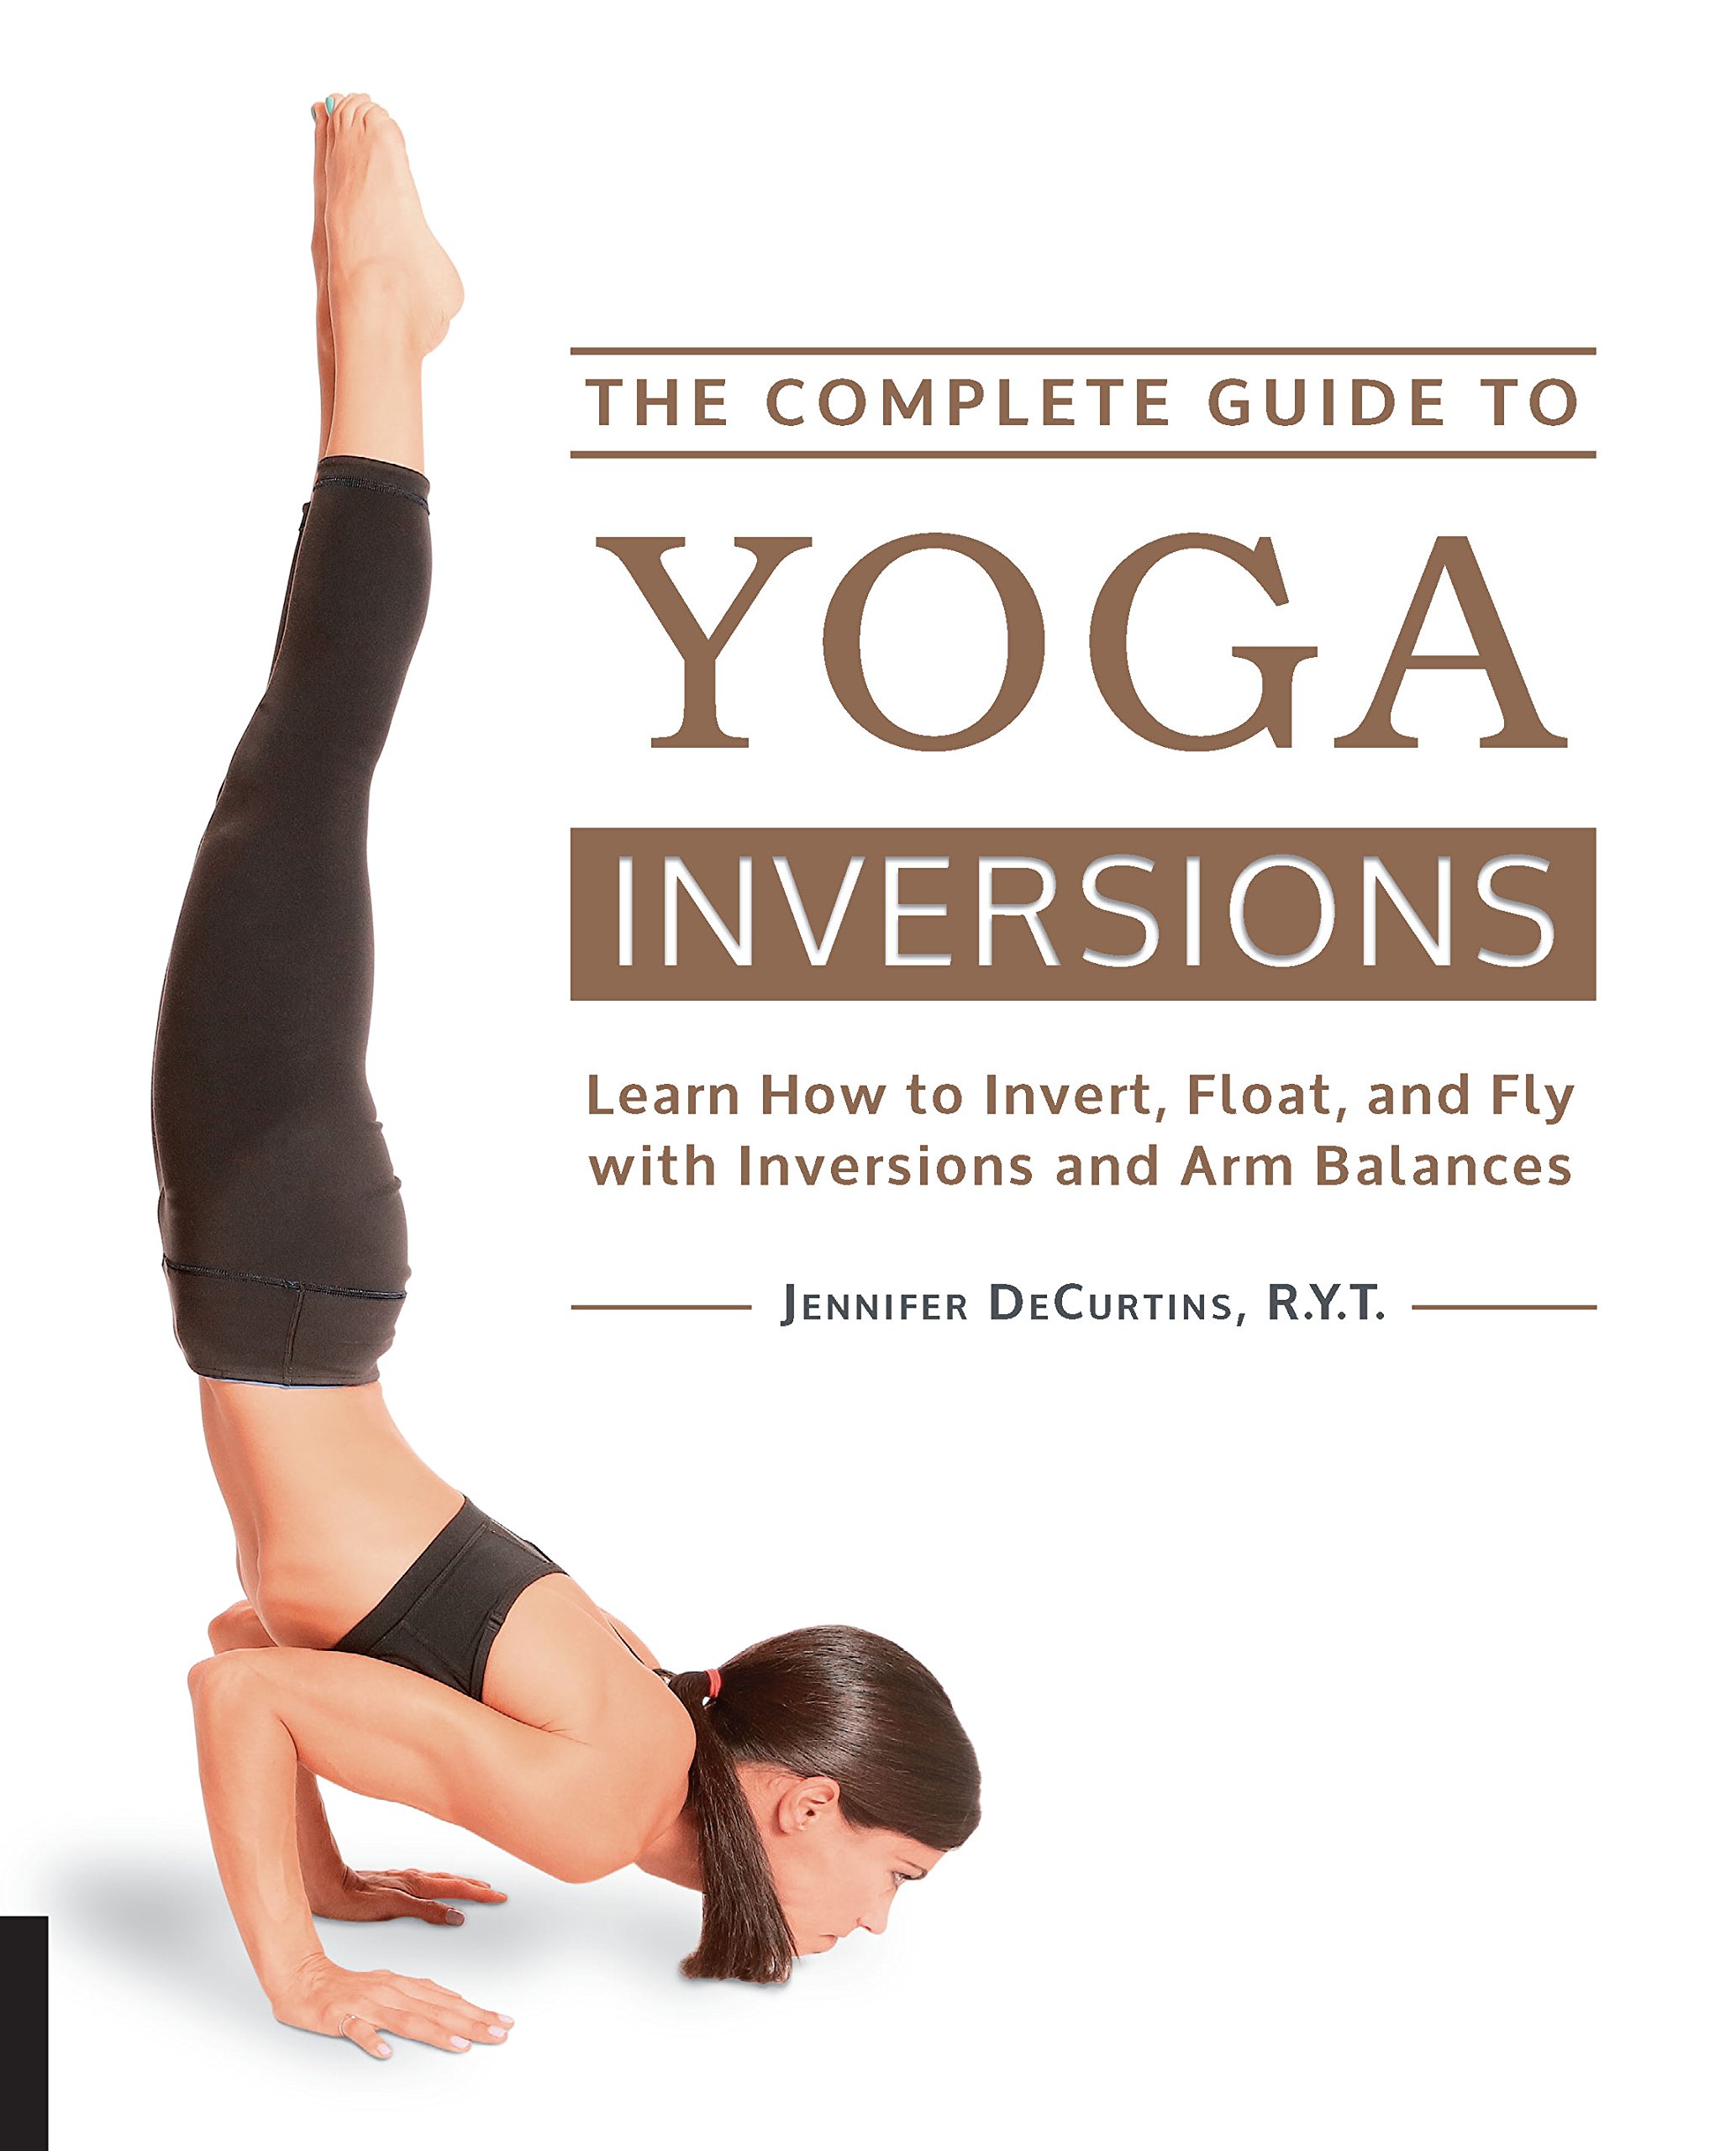 The Complete Guide to Yoga Inversions - Jennifer DeCurtins